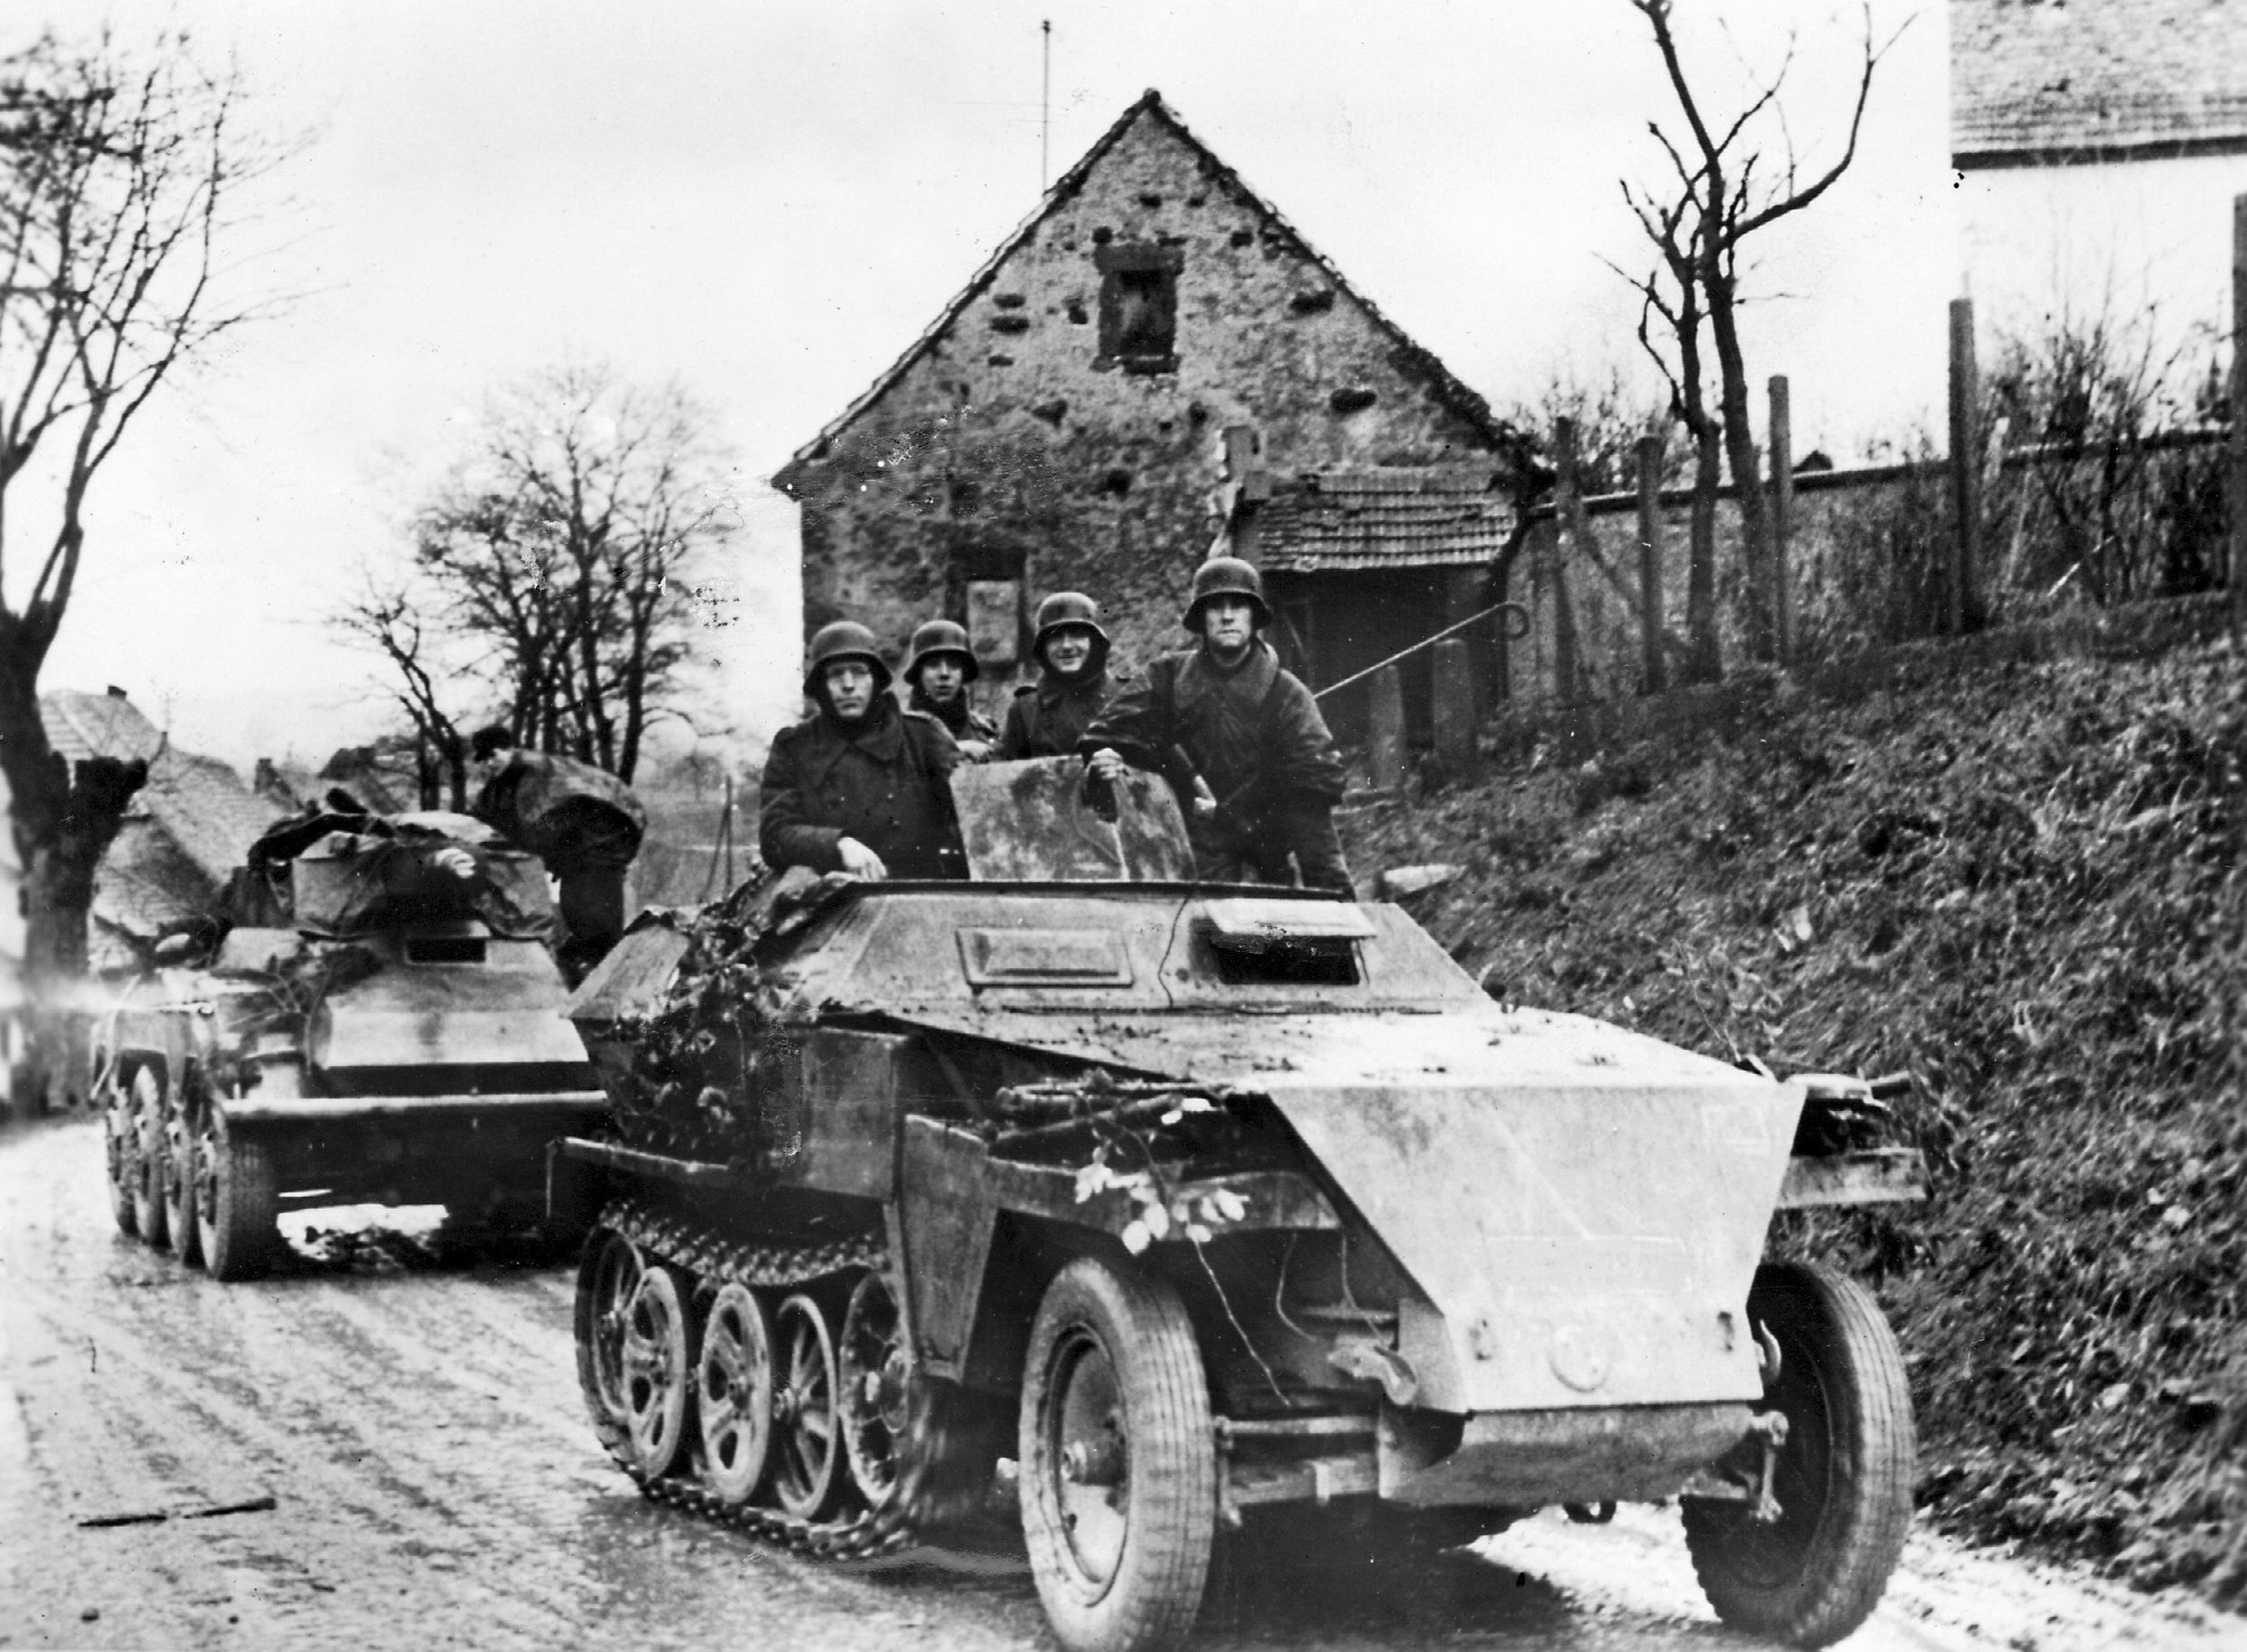 In October 1944, a German Schutzenpanzer half-track moves toward the fighting on the Western Front in company with a light tank. The German defense of Aachen, once the capital of the Holy Roman Empire, was tenacious. (ullstein bild)